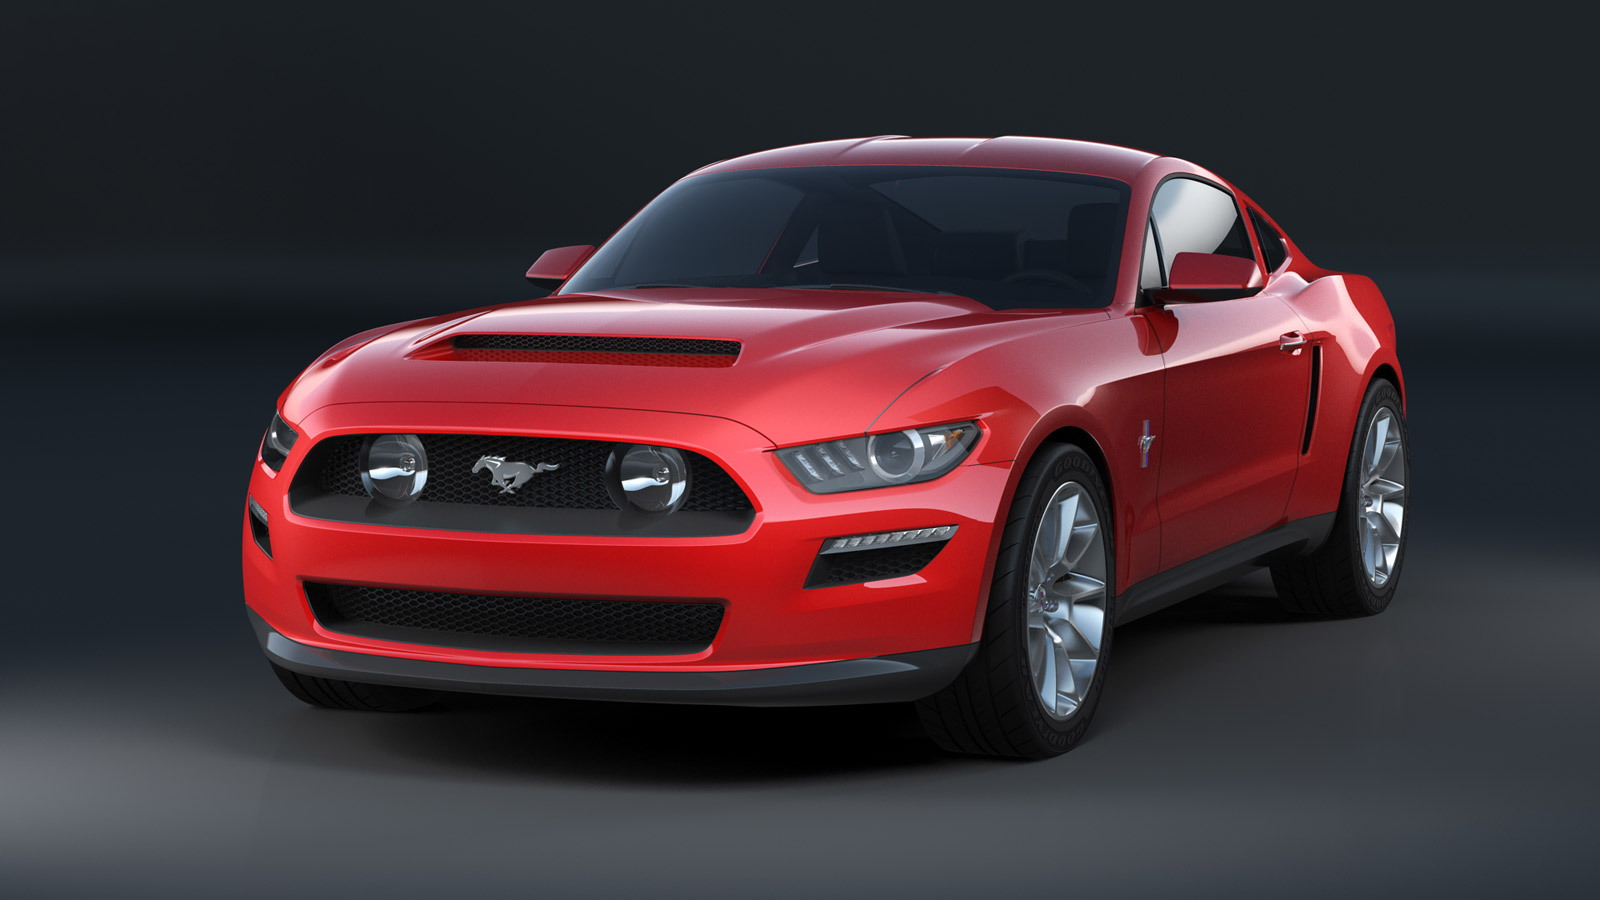 Designing the 2015 Ford Mustang